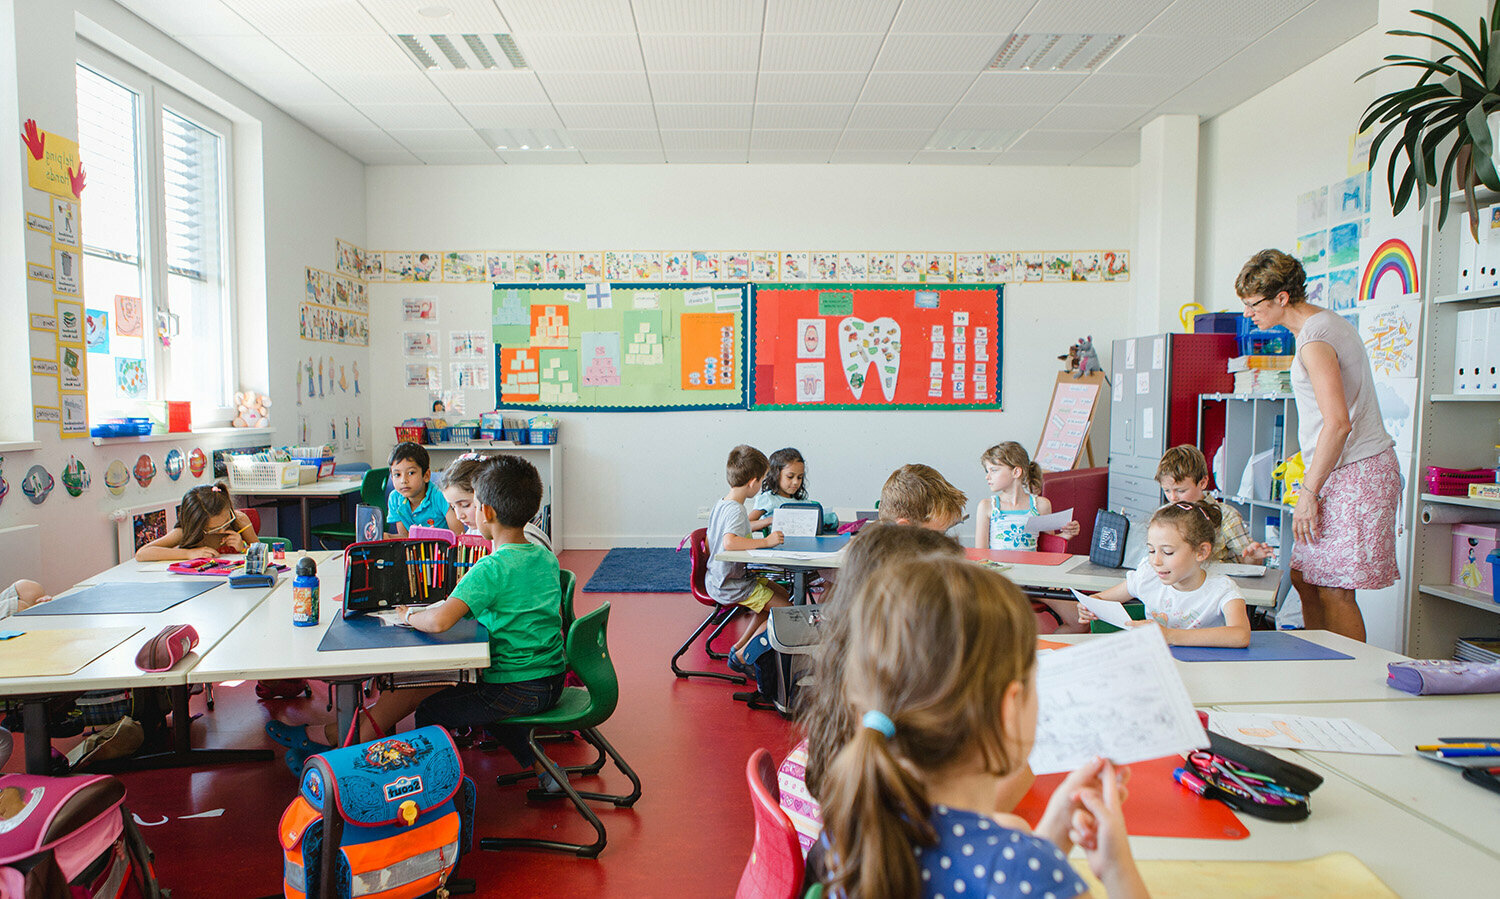 Primary school students sit at their desks in a colourful classroom and work.